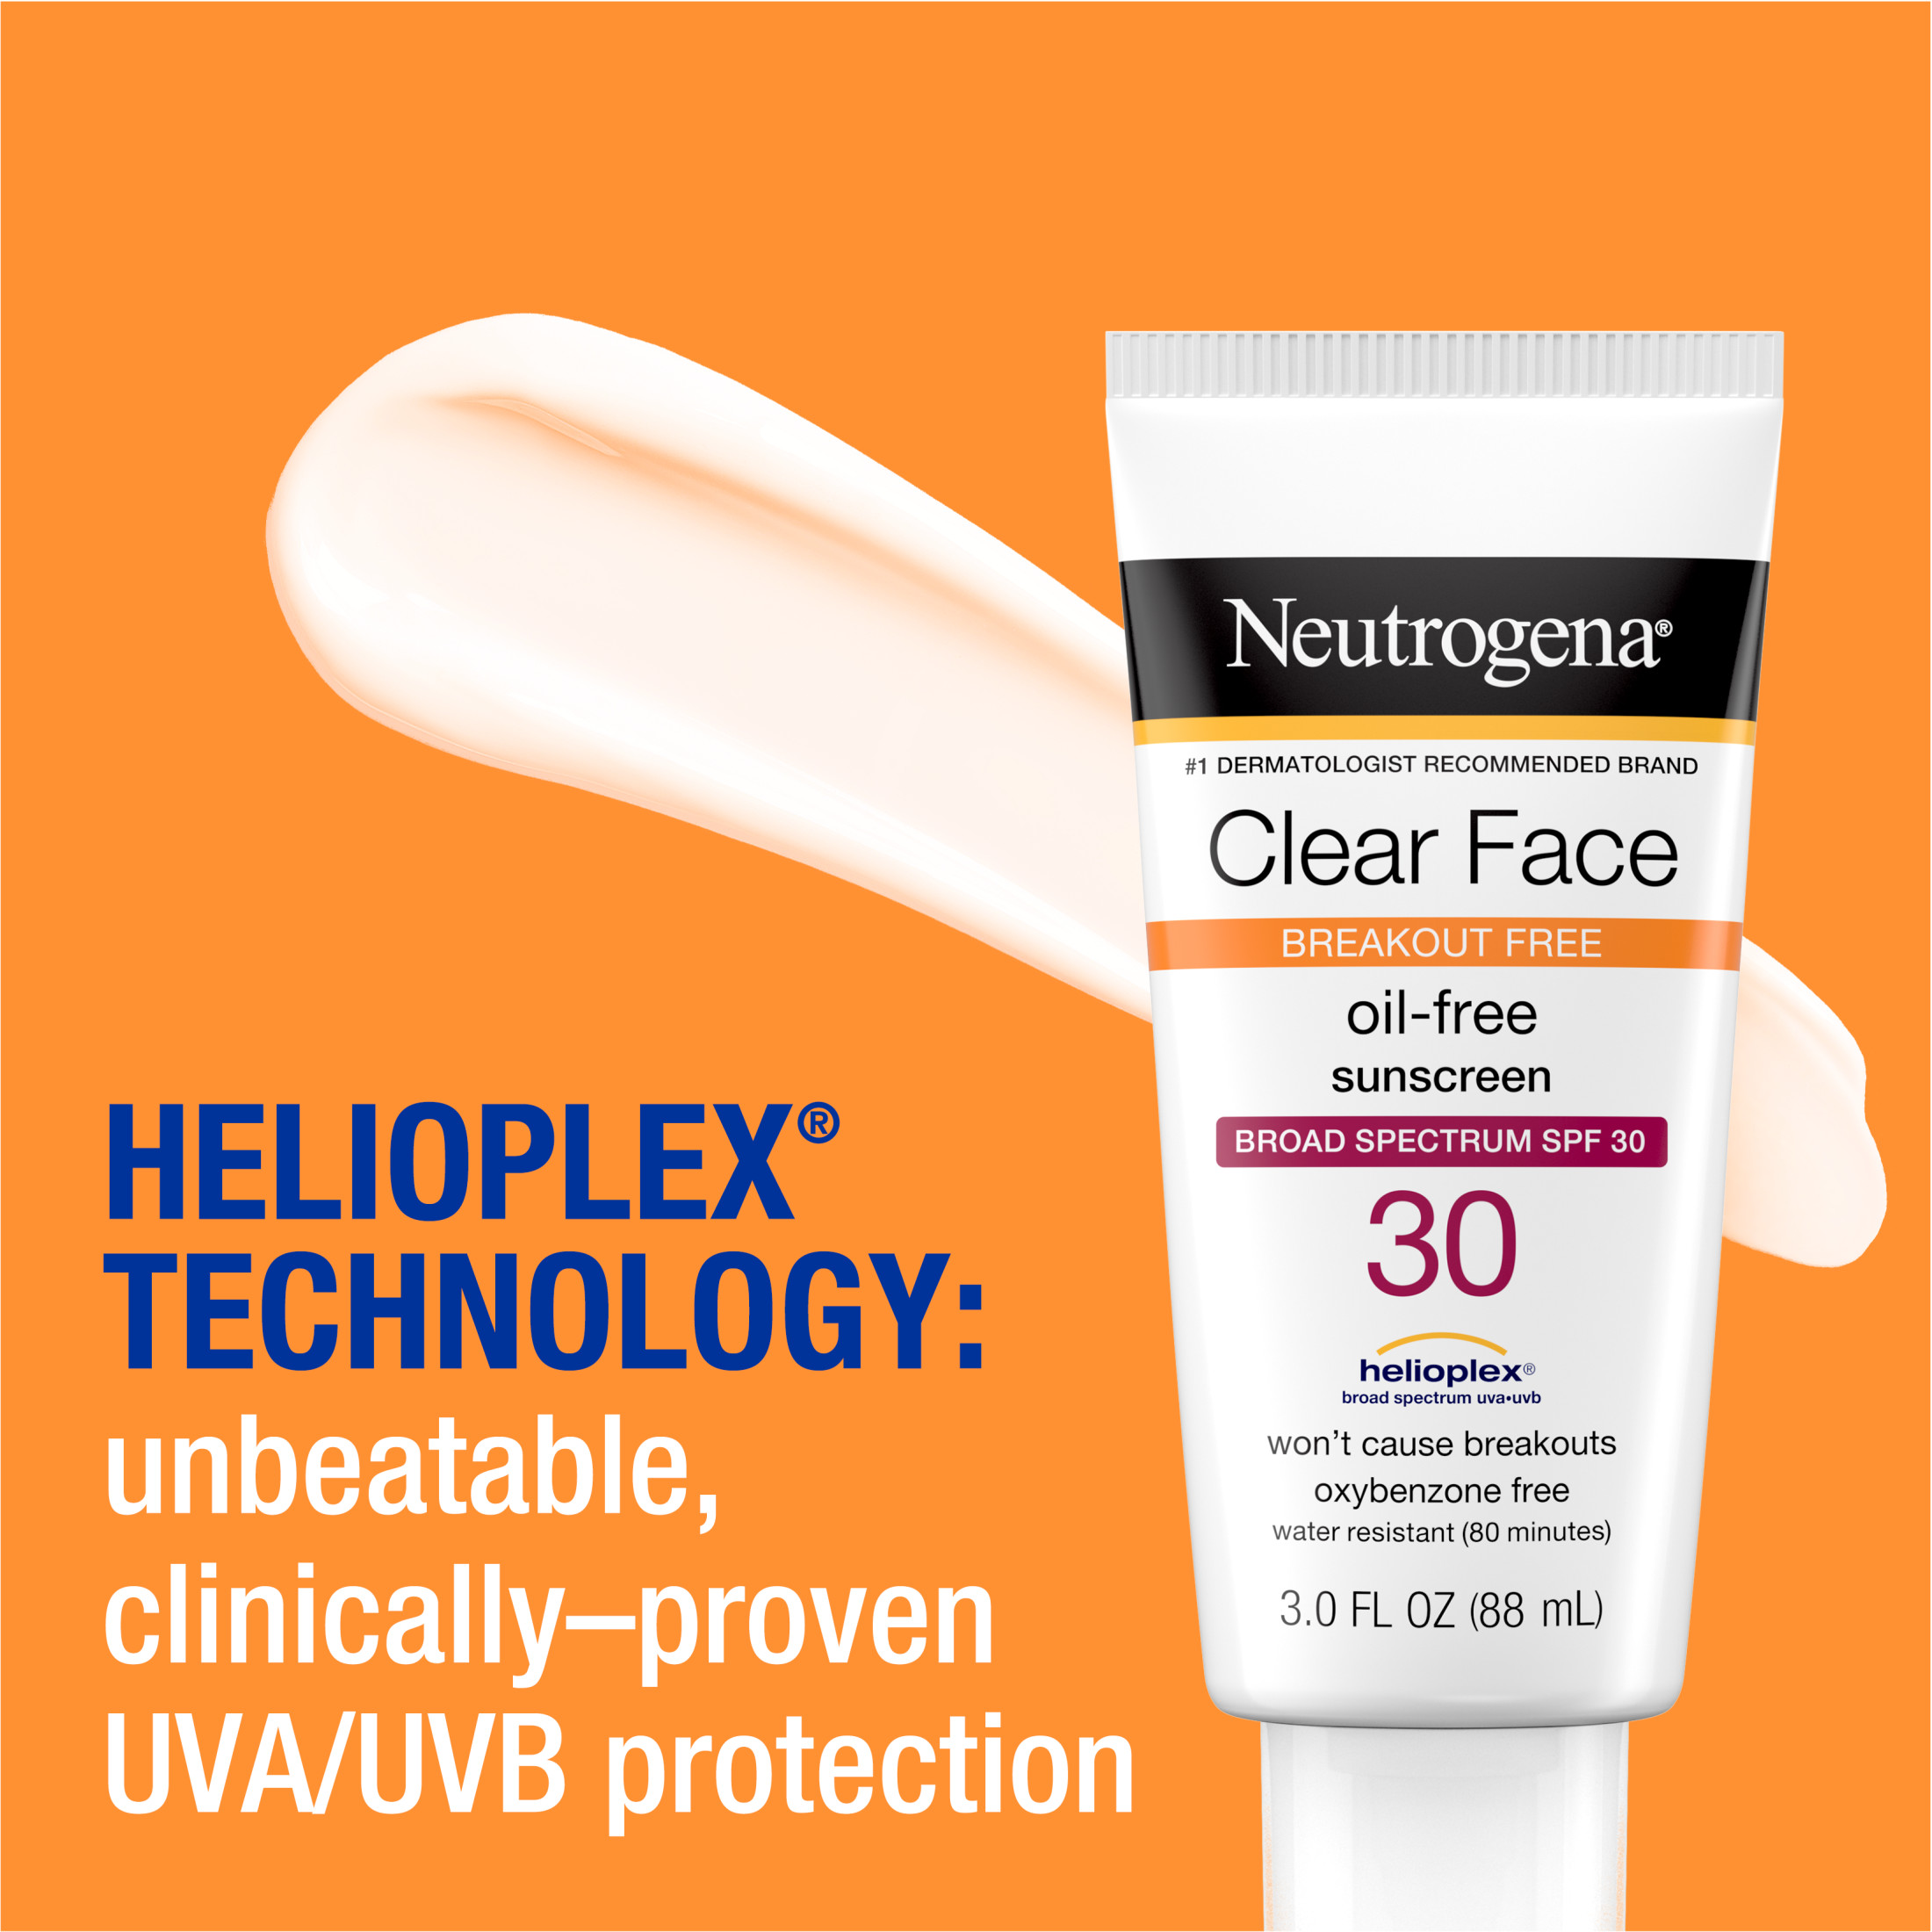 Neutrogena Clear Face Liquid Lotion Sunscreen with SPF 30, 3 fl. oz - image 5 of 16